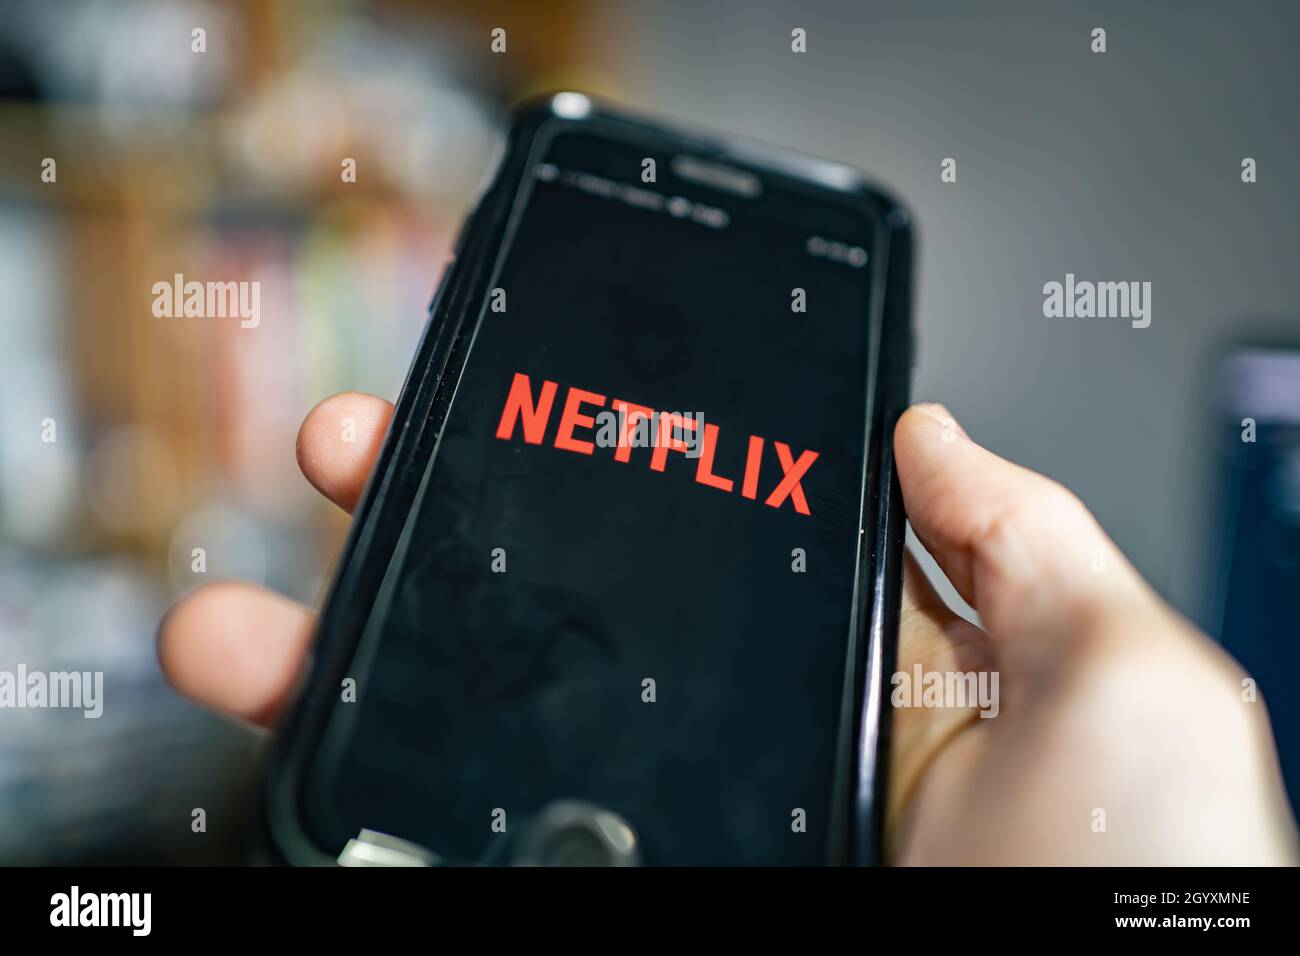 Bangkok, Thailand - October 4, 2021: iPhone 7 showing its screen with Netflix application. Stock Photo